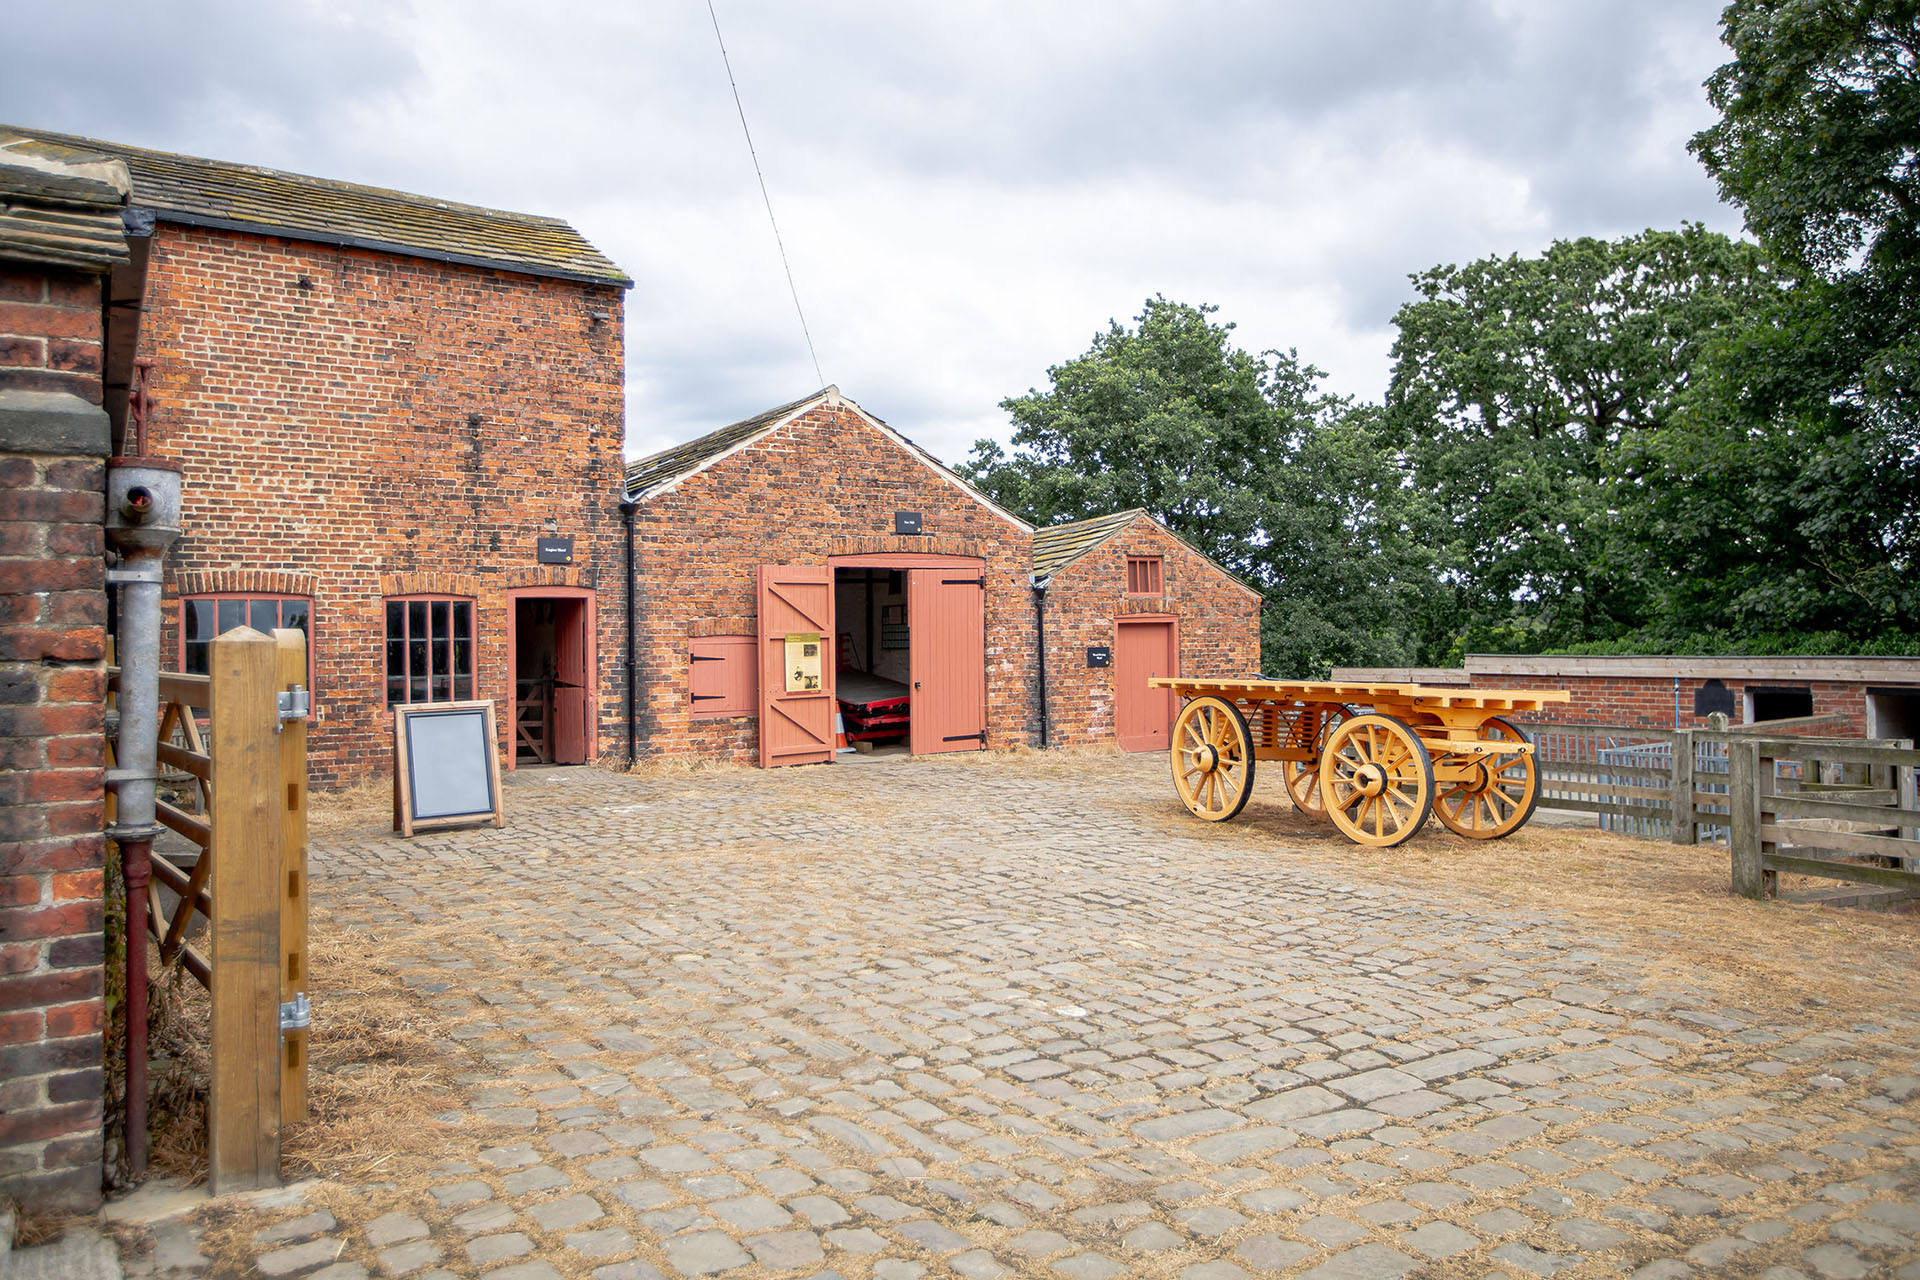 The courtyard to Temple Newsam Farm showing the cobblestone floor, old machine and well maintained barns and buildings